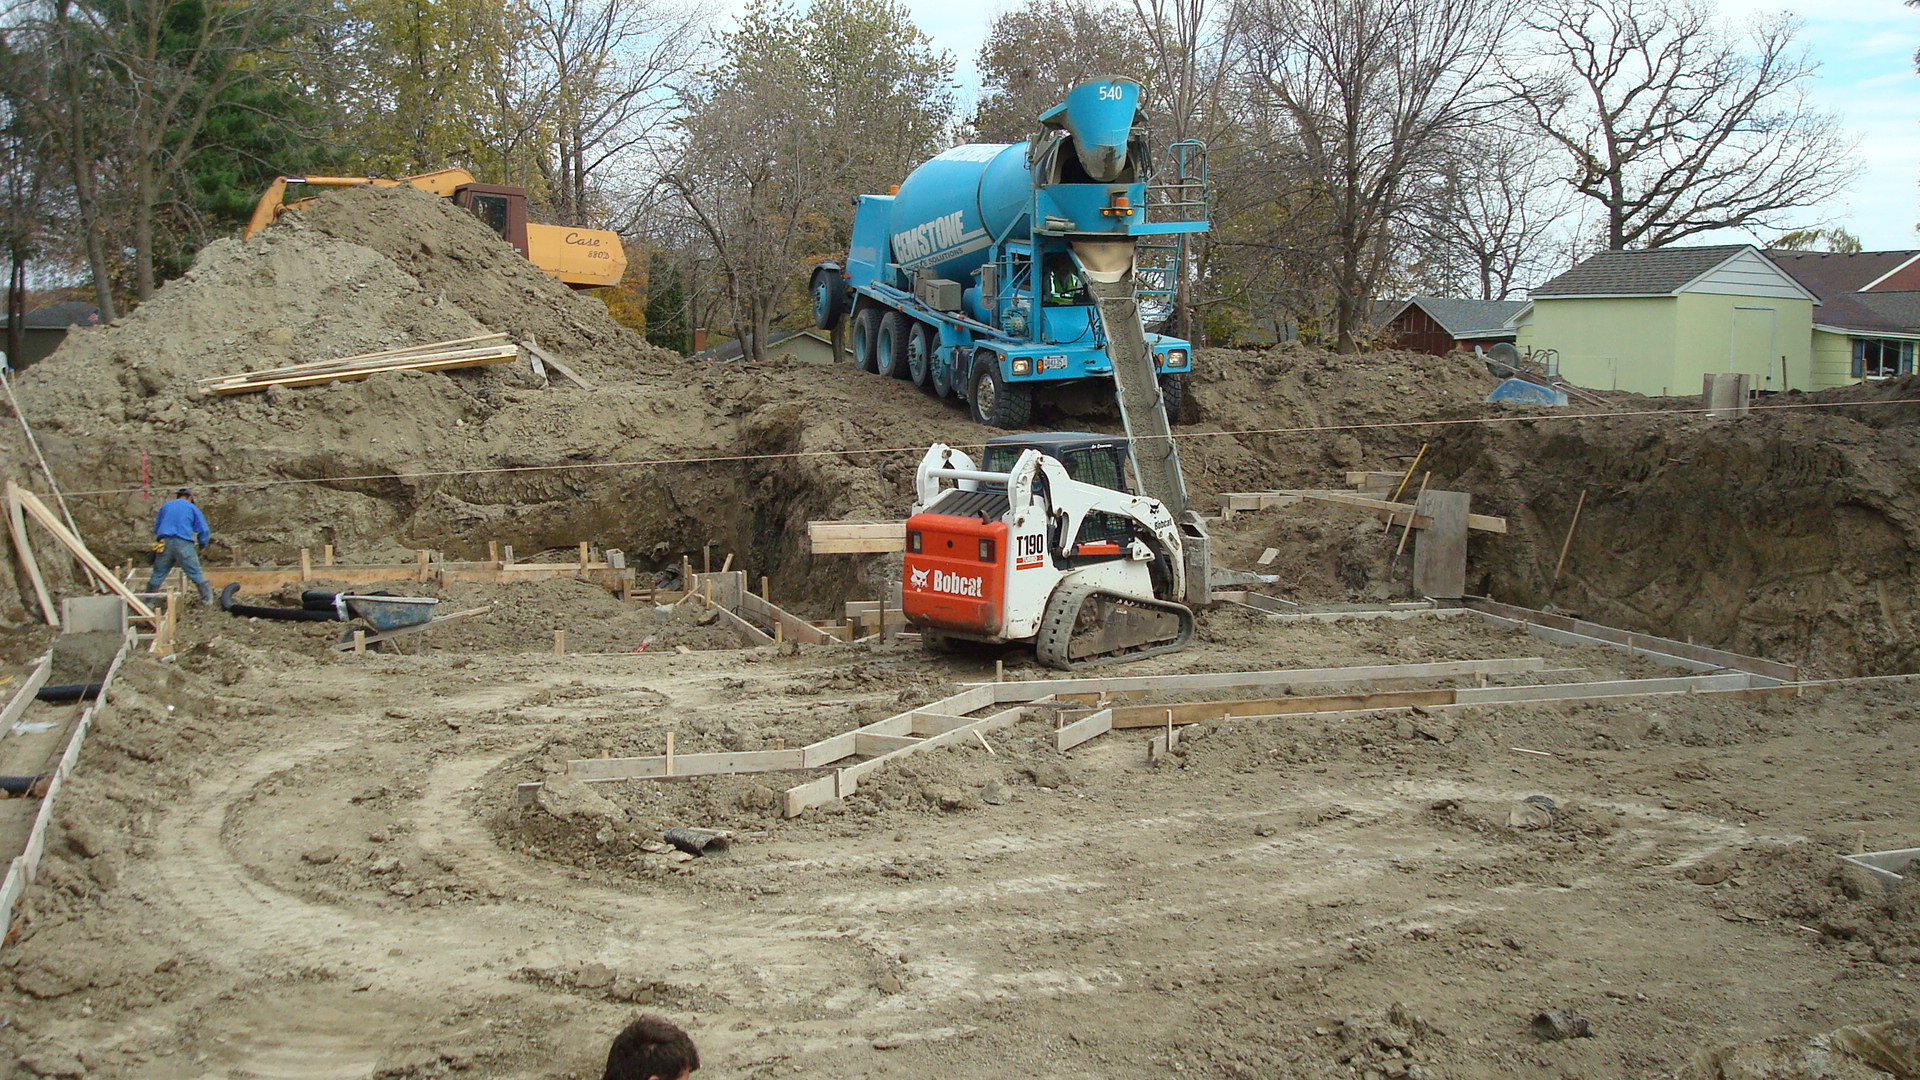 Voehl Construction provides excavation digging and concrete pouring services for residential and commercial properties in the Twin Cities metro area.